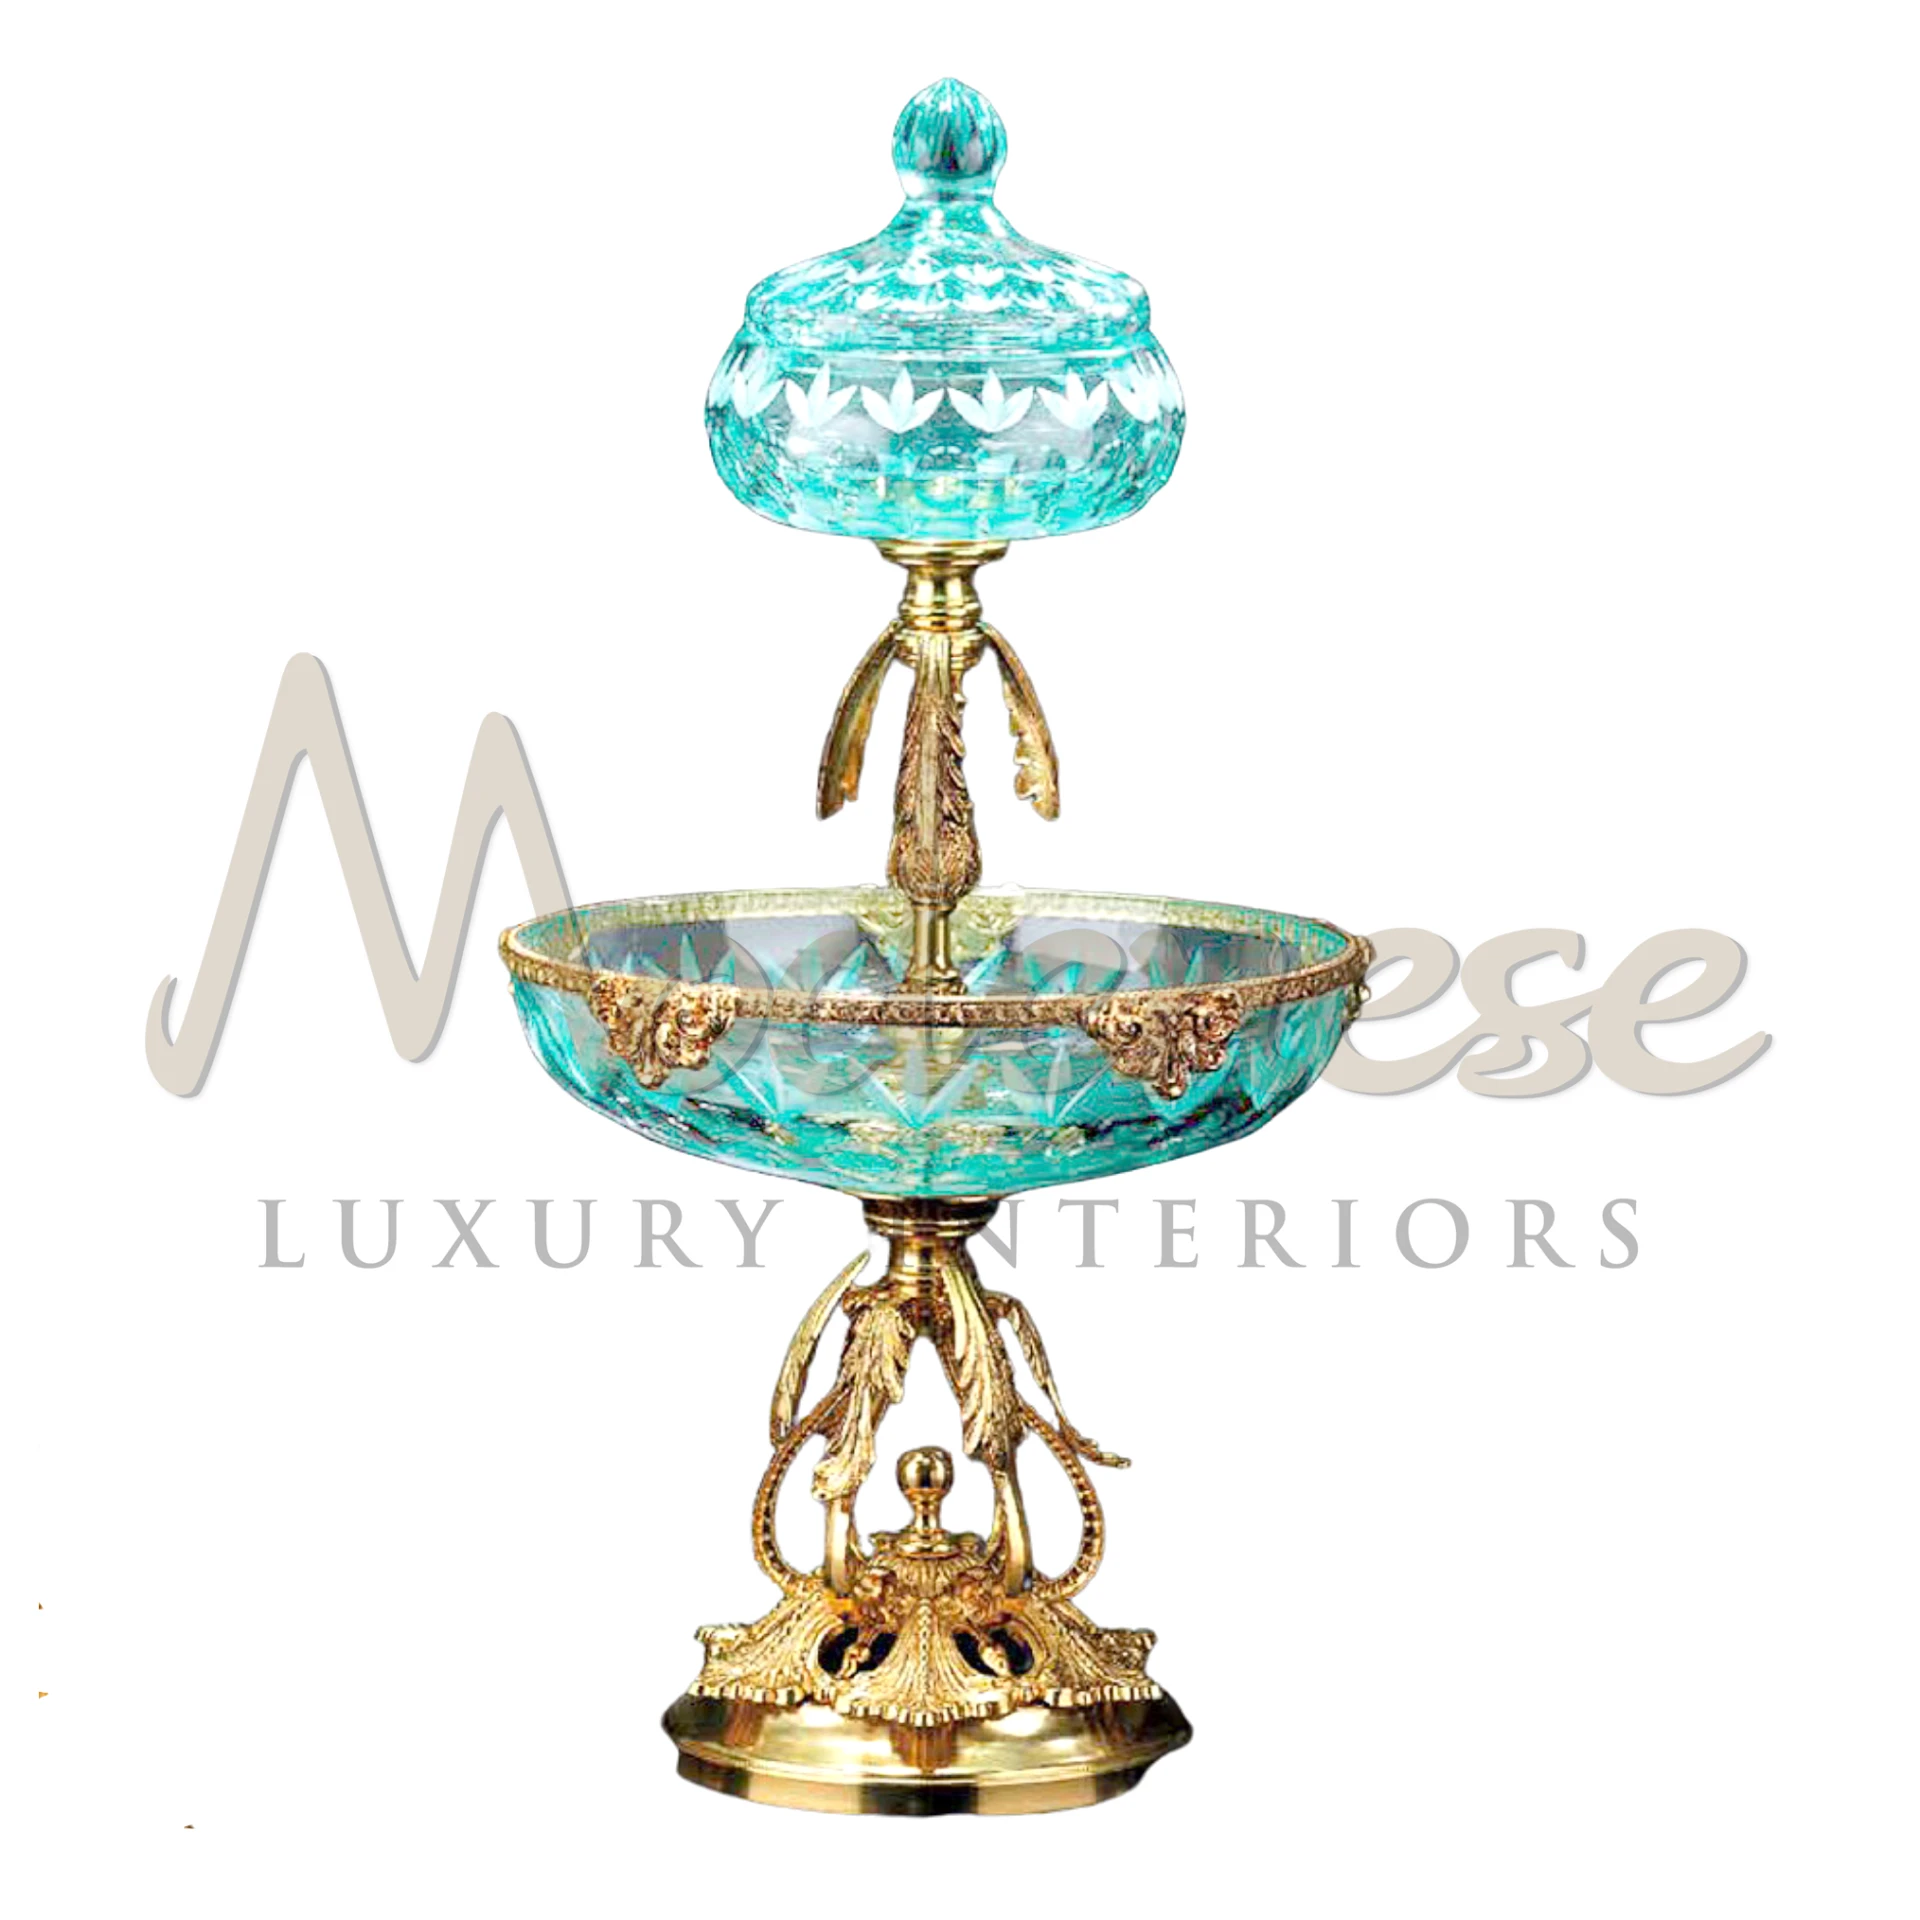 Luxury Turquoise Double Deck Bowl, a sophisticated glass vase for interior design, blending baroque and classic styles for a luxurious interior.






